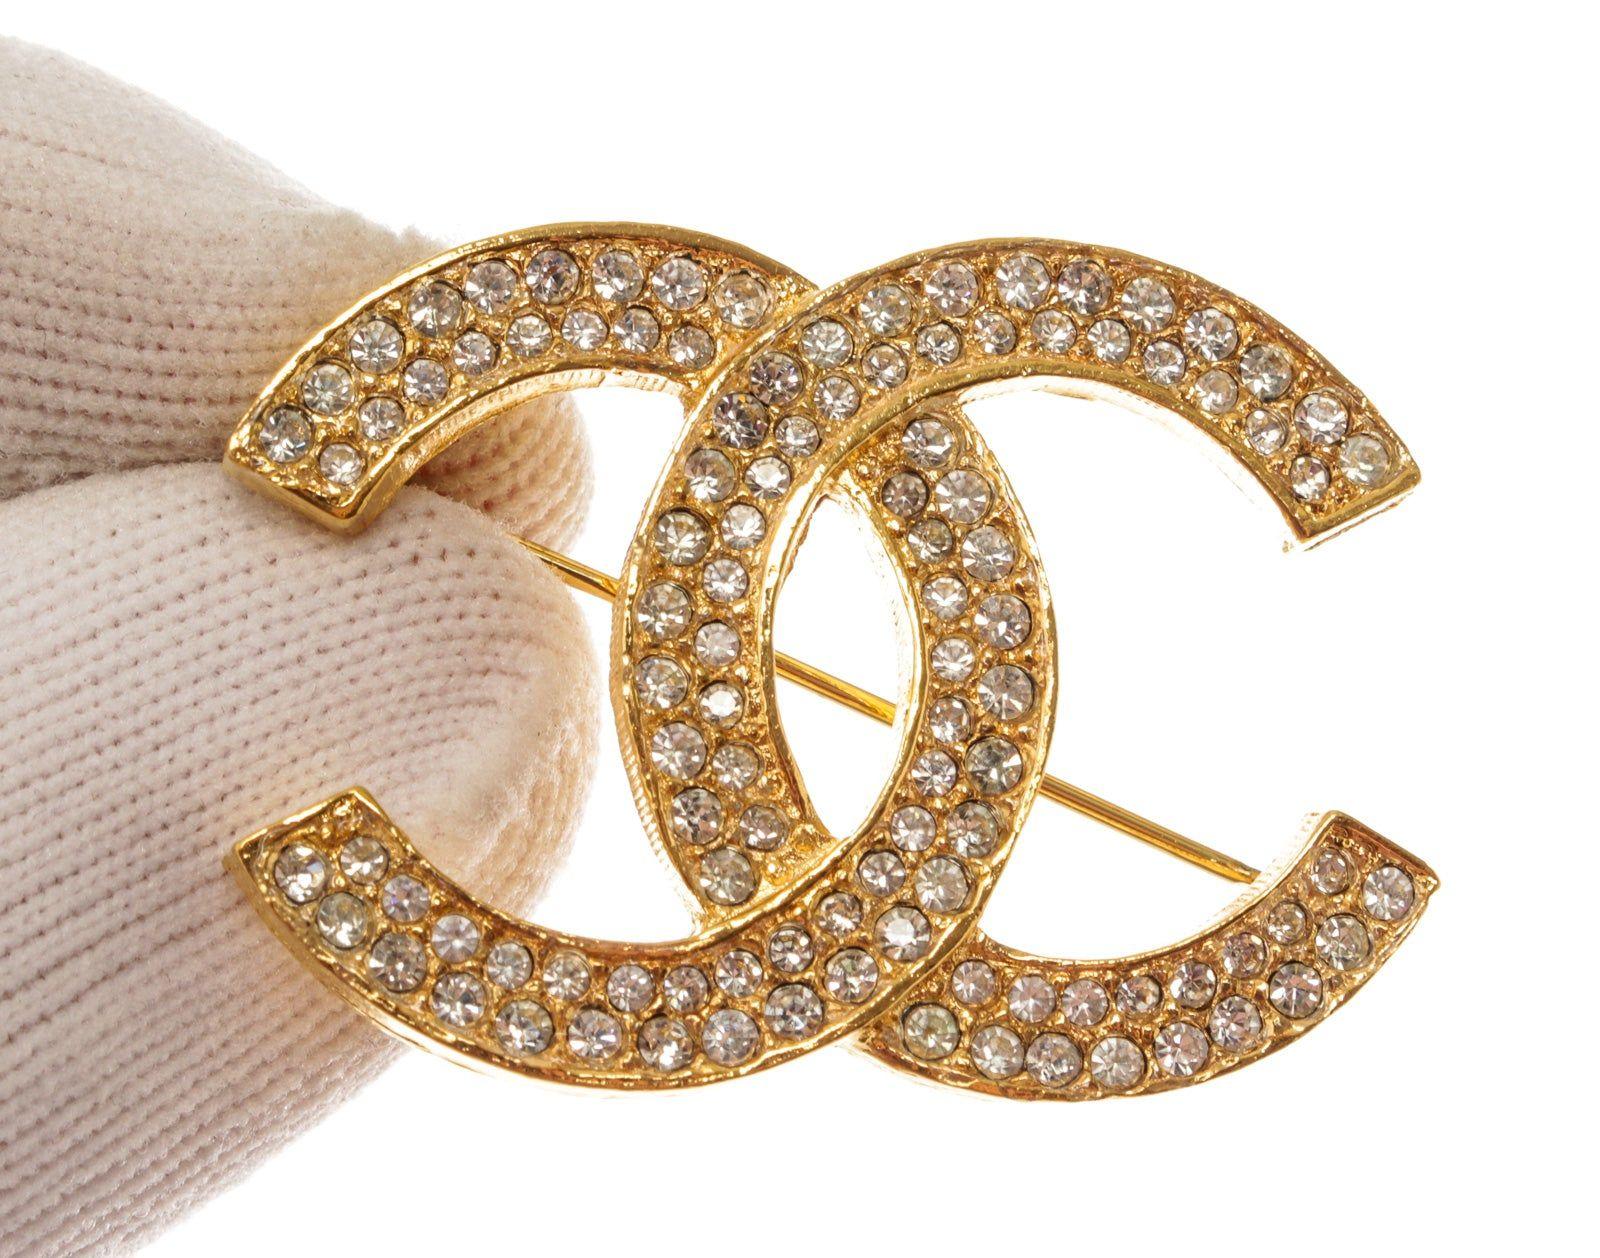 Chanel Vintage Gold-tone Metal CC Rhinestone Brooch features CC logo Chanel brooch with rhinestones, gold-tone hardware and safety-pin closure clasp.


57022MSC